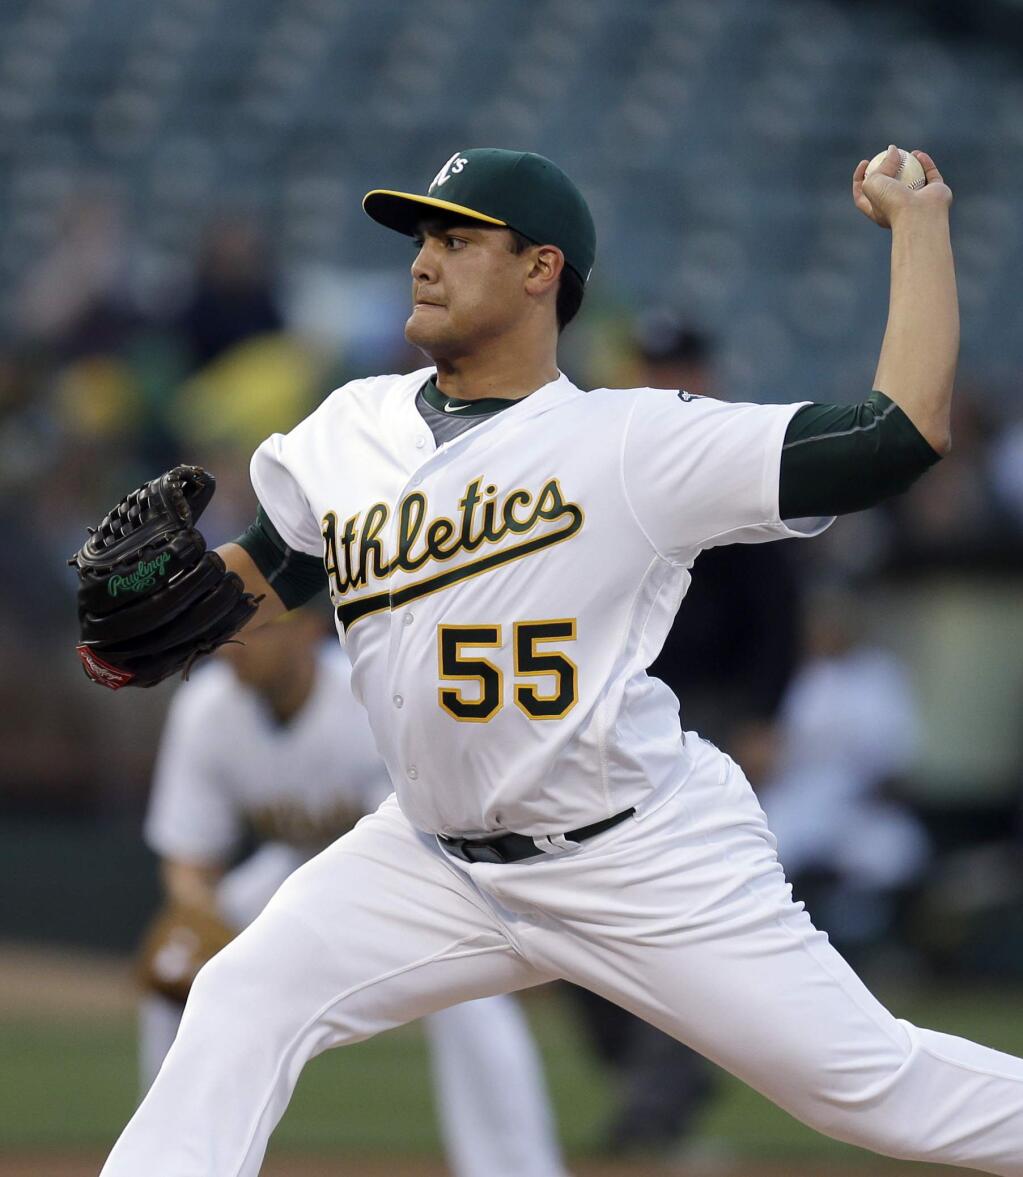 Oakland Athletics pitcher Sean Manaea works against the Texas Rangers in the first inning of a baseball game, Monday, May 16, 2016, in Oakland, Calif. (AP Photo/Ben Margot)